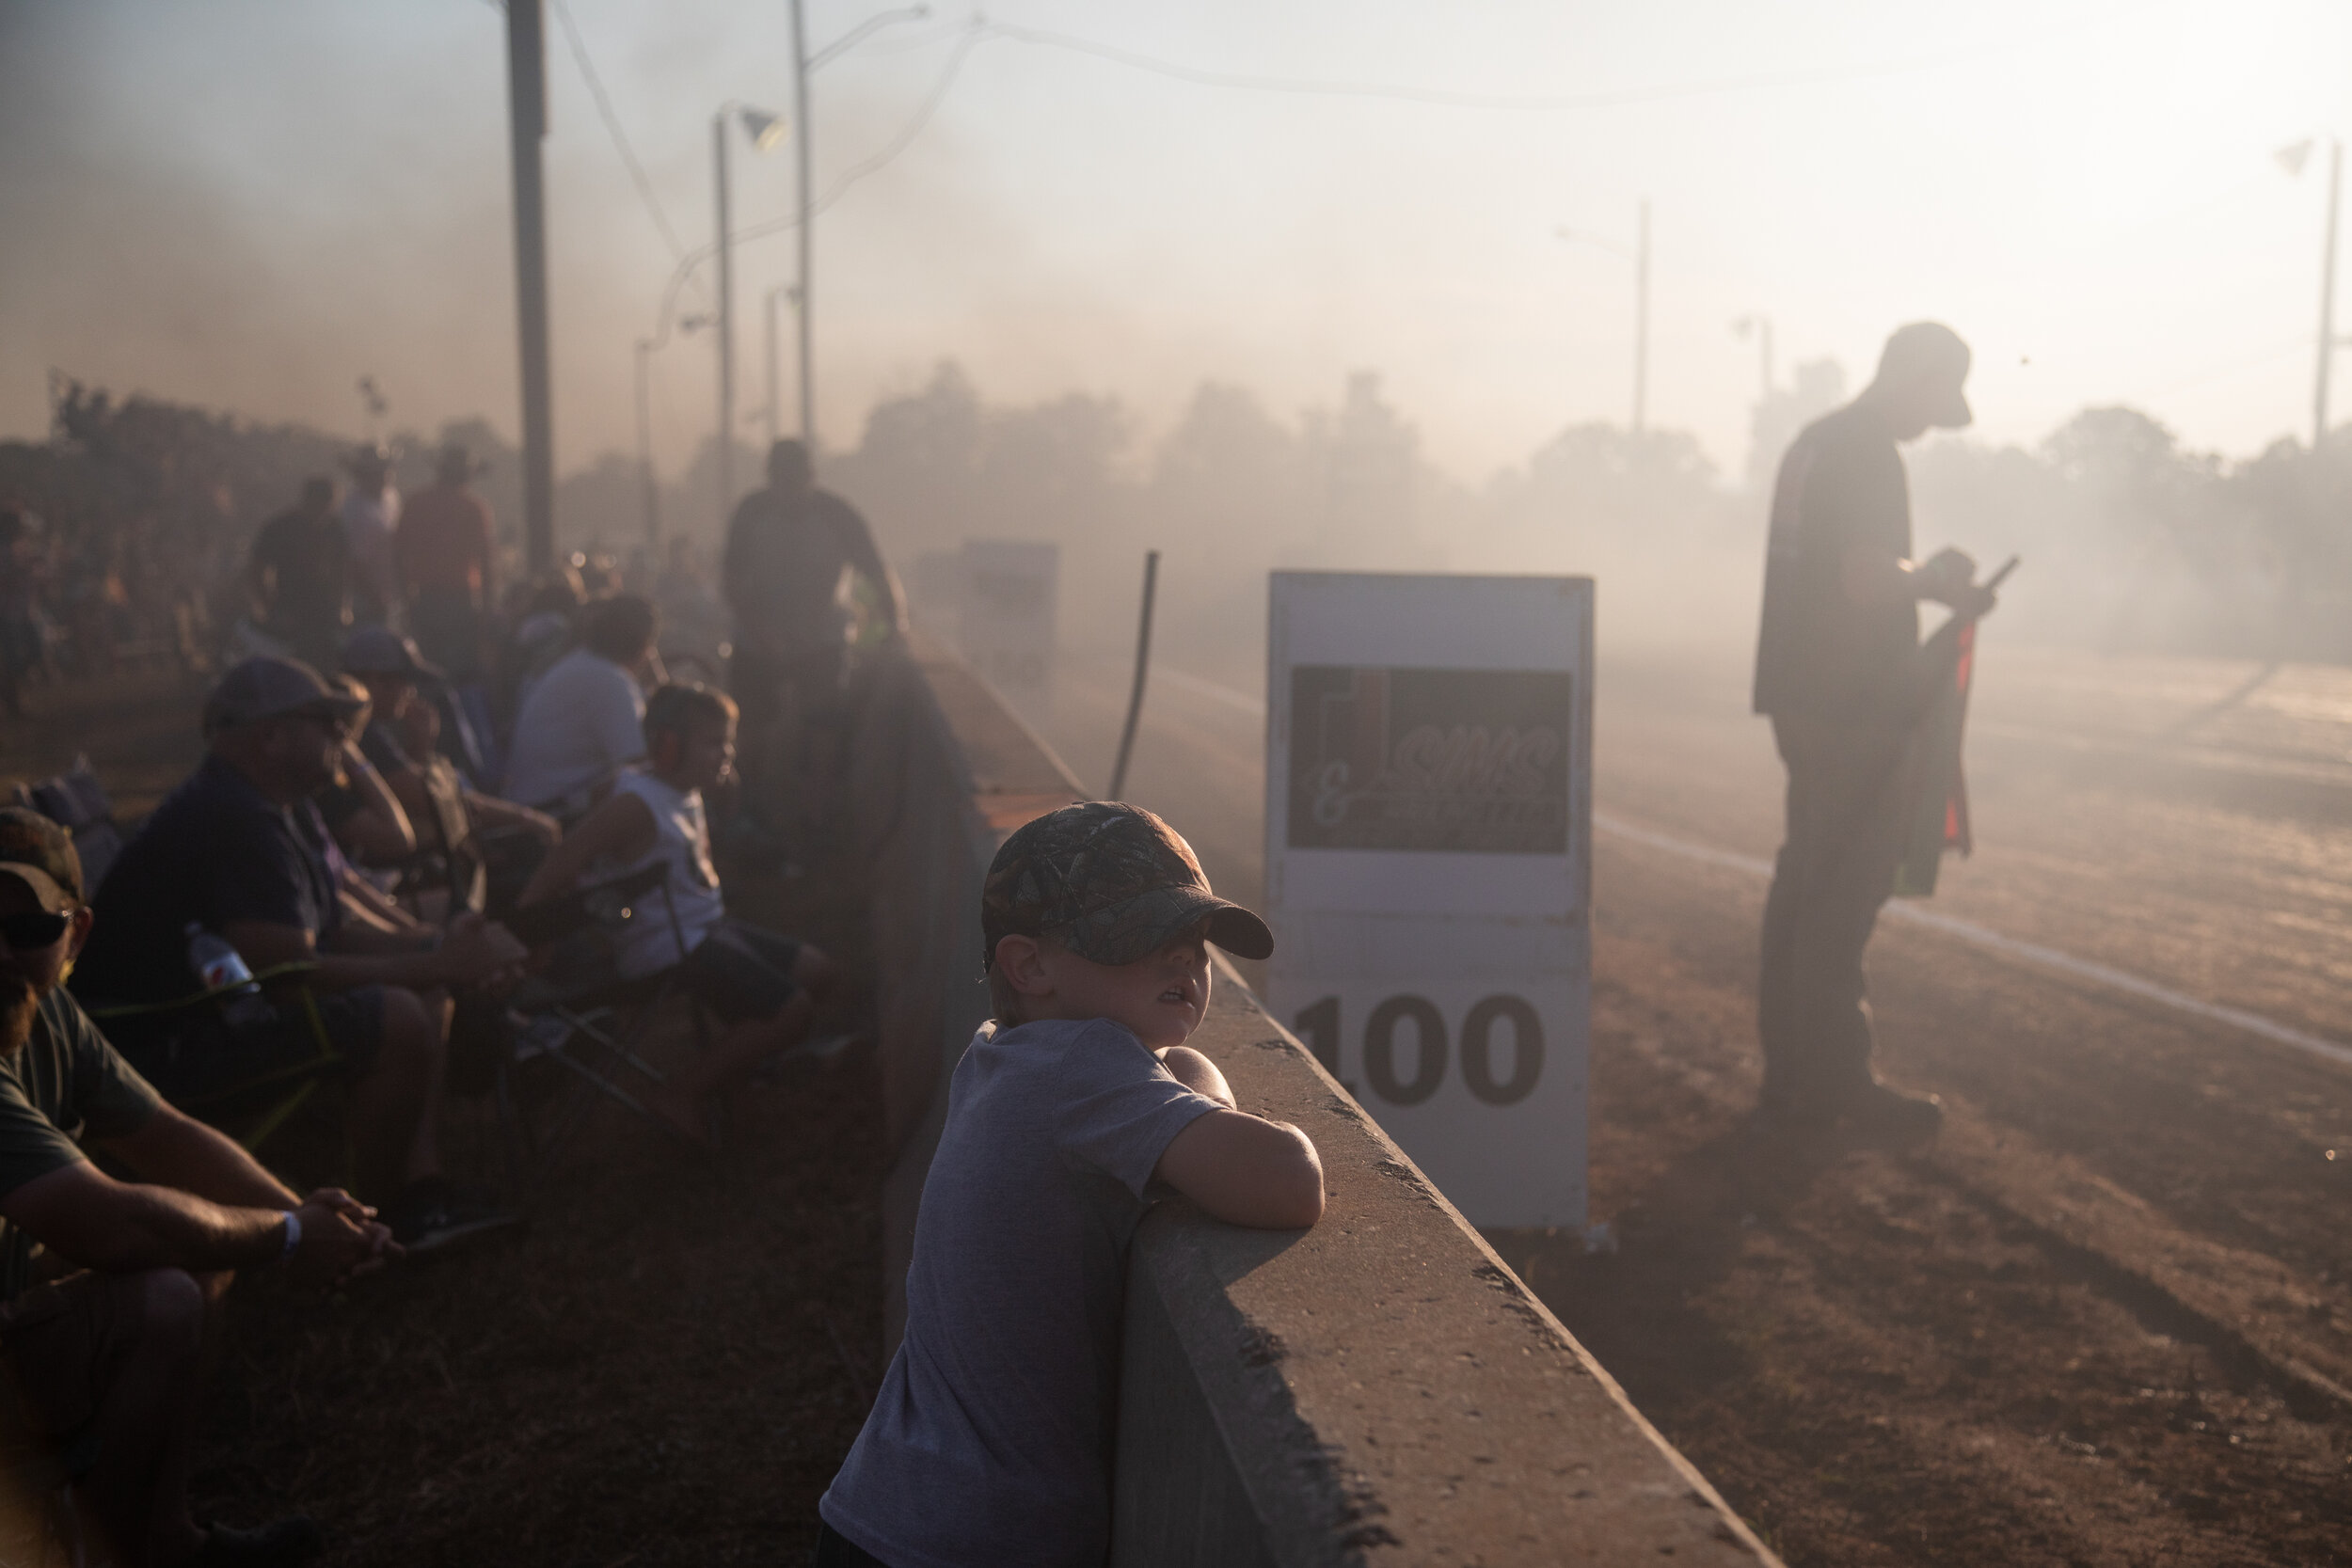  Gunner Patterson, 5, looks out onto the track from the sidelines waiting for the next truck pull during the 13th Annual Truck and Tractor Pull Saturday, September 7, 2019 at Sims Farm. (Emily Elconin for The News &amp; Advance) 